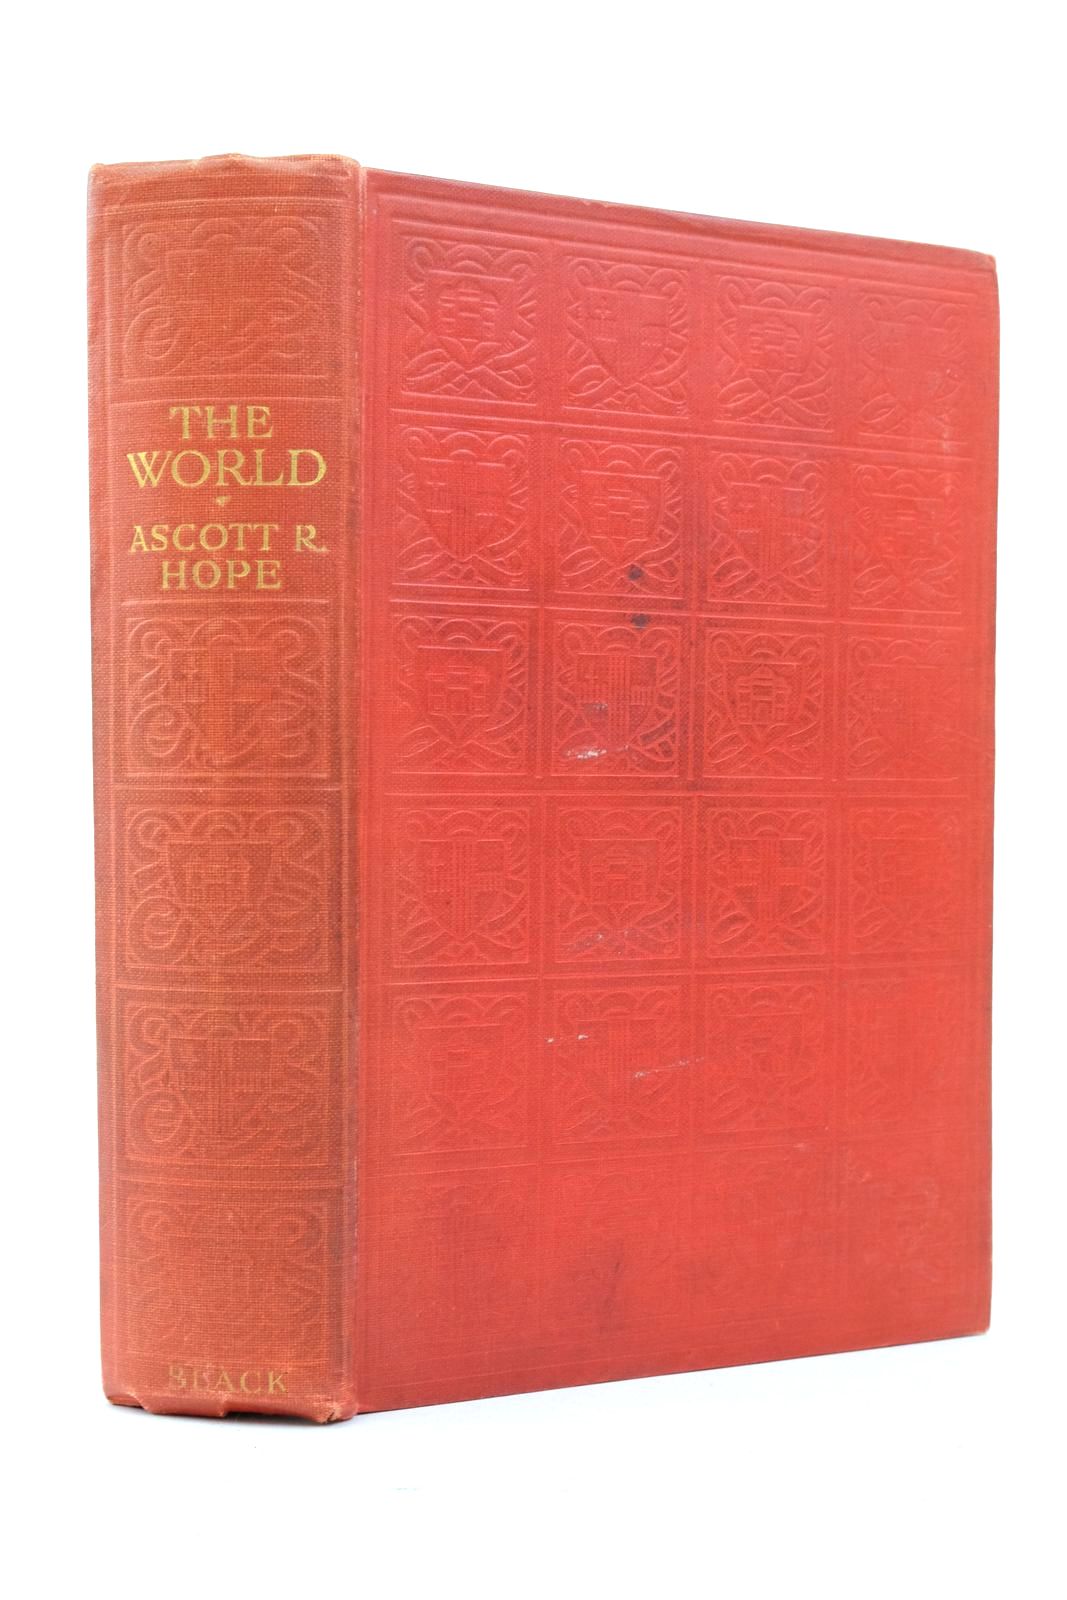 Photo of THE WORLD written by Hope, Ascott R. published by A. &amp; C. Black Ltd. (STOCK CODE: 2137592)  for sale by Stella & Rose's Books